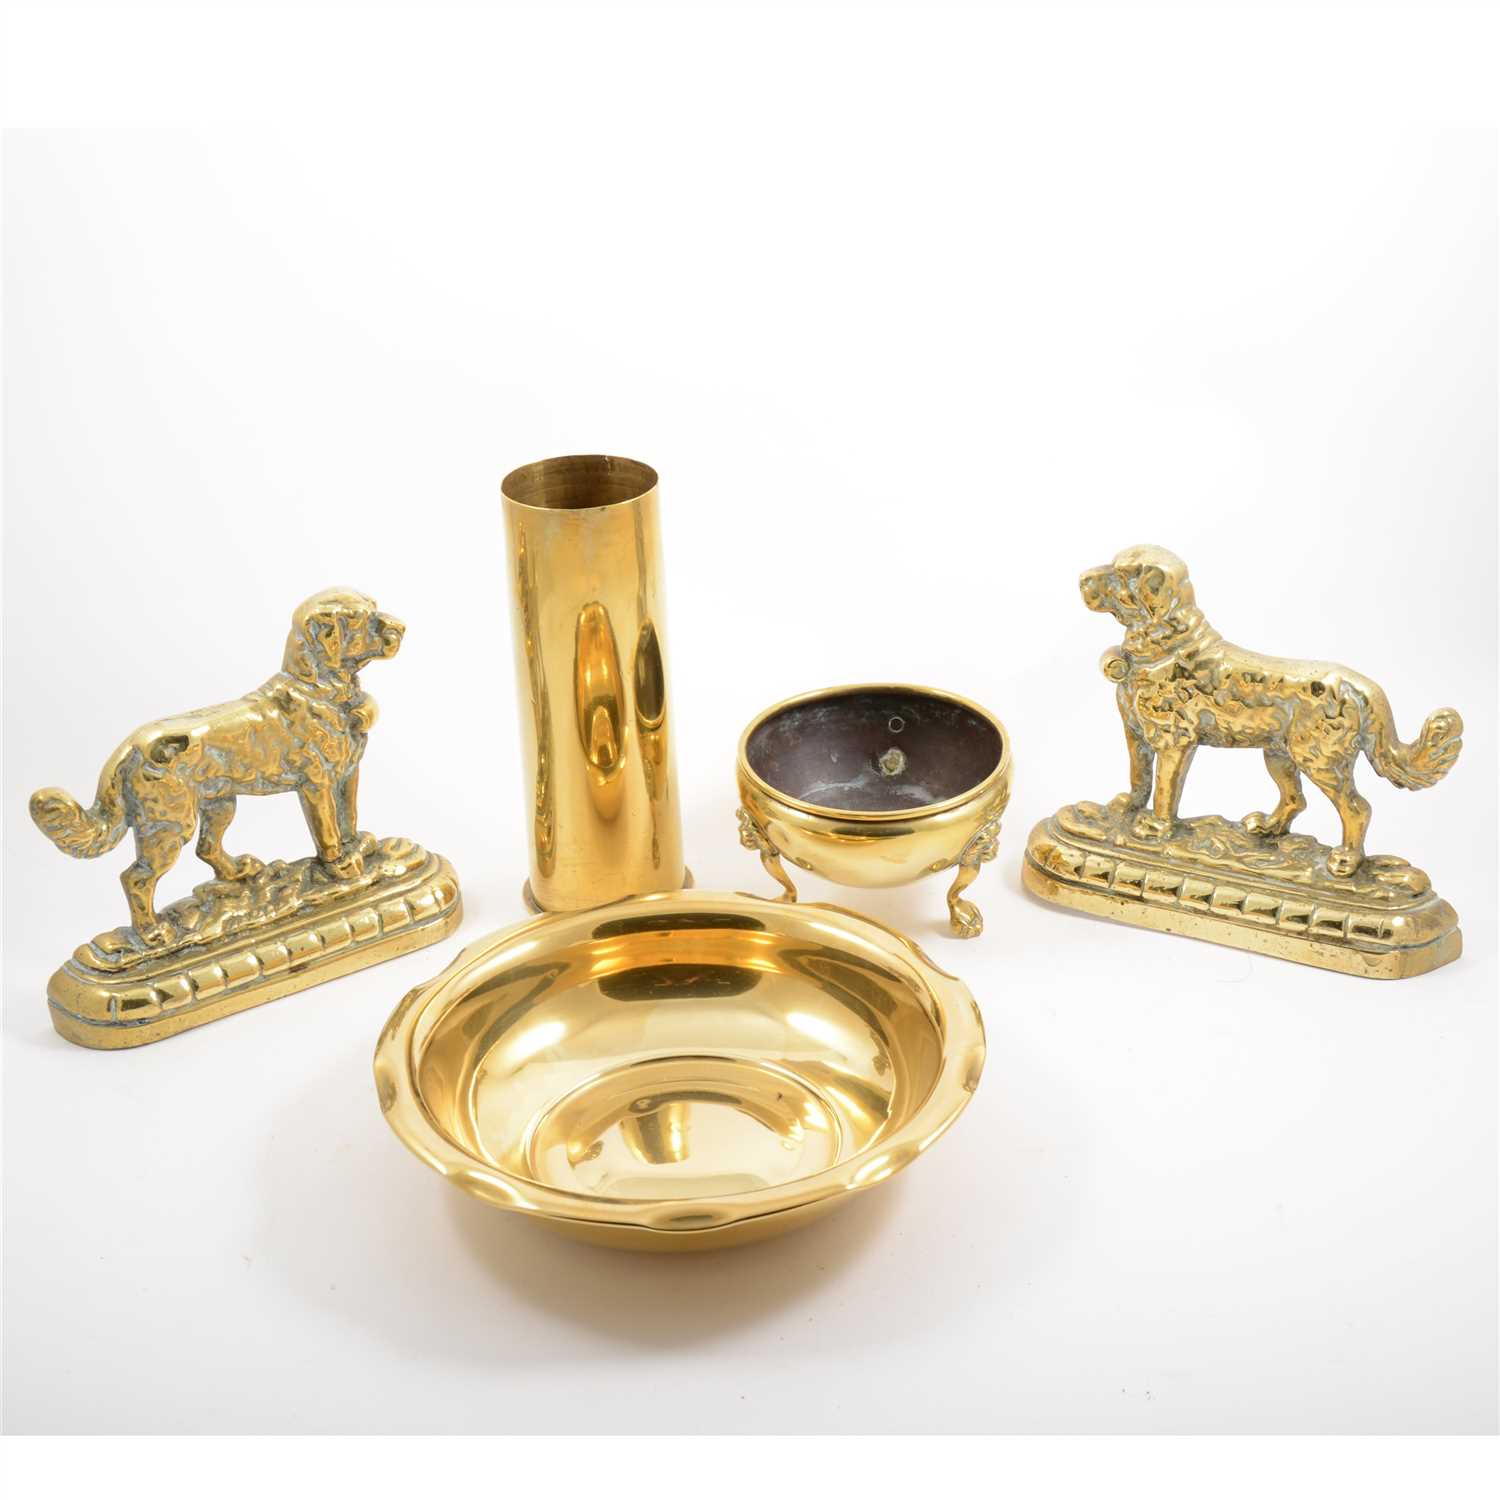 Lot 92 - Quantity of brass and copper ware, including two shellcase vases, doorstops cast as dogs, etc.